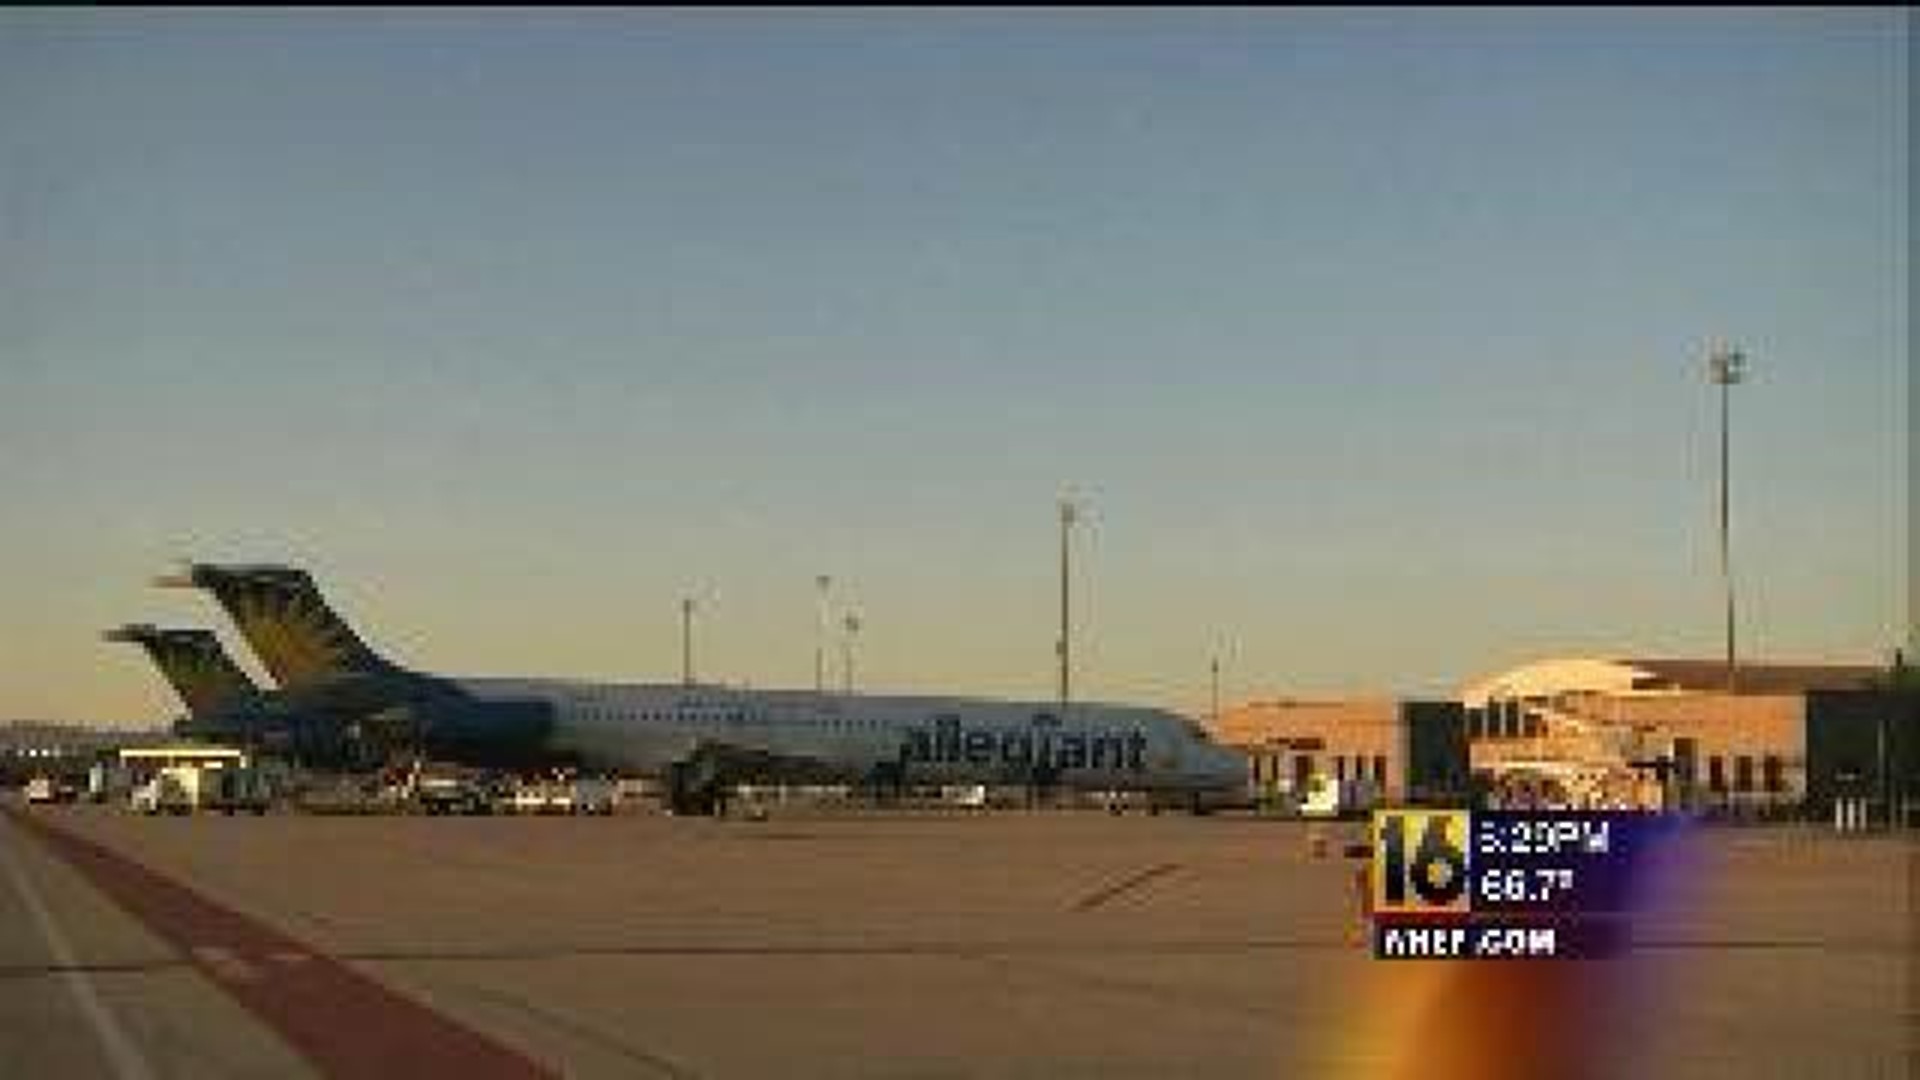 New Airline Offers Flights to Orlando